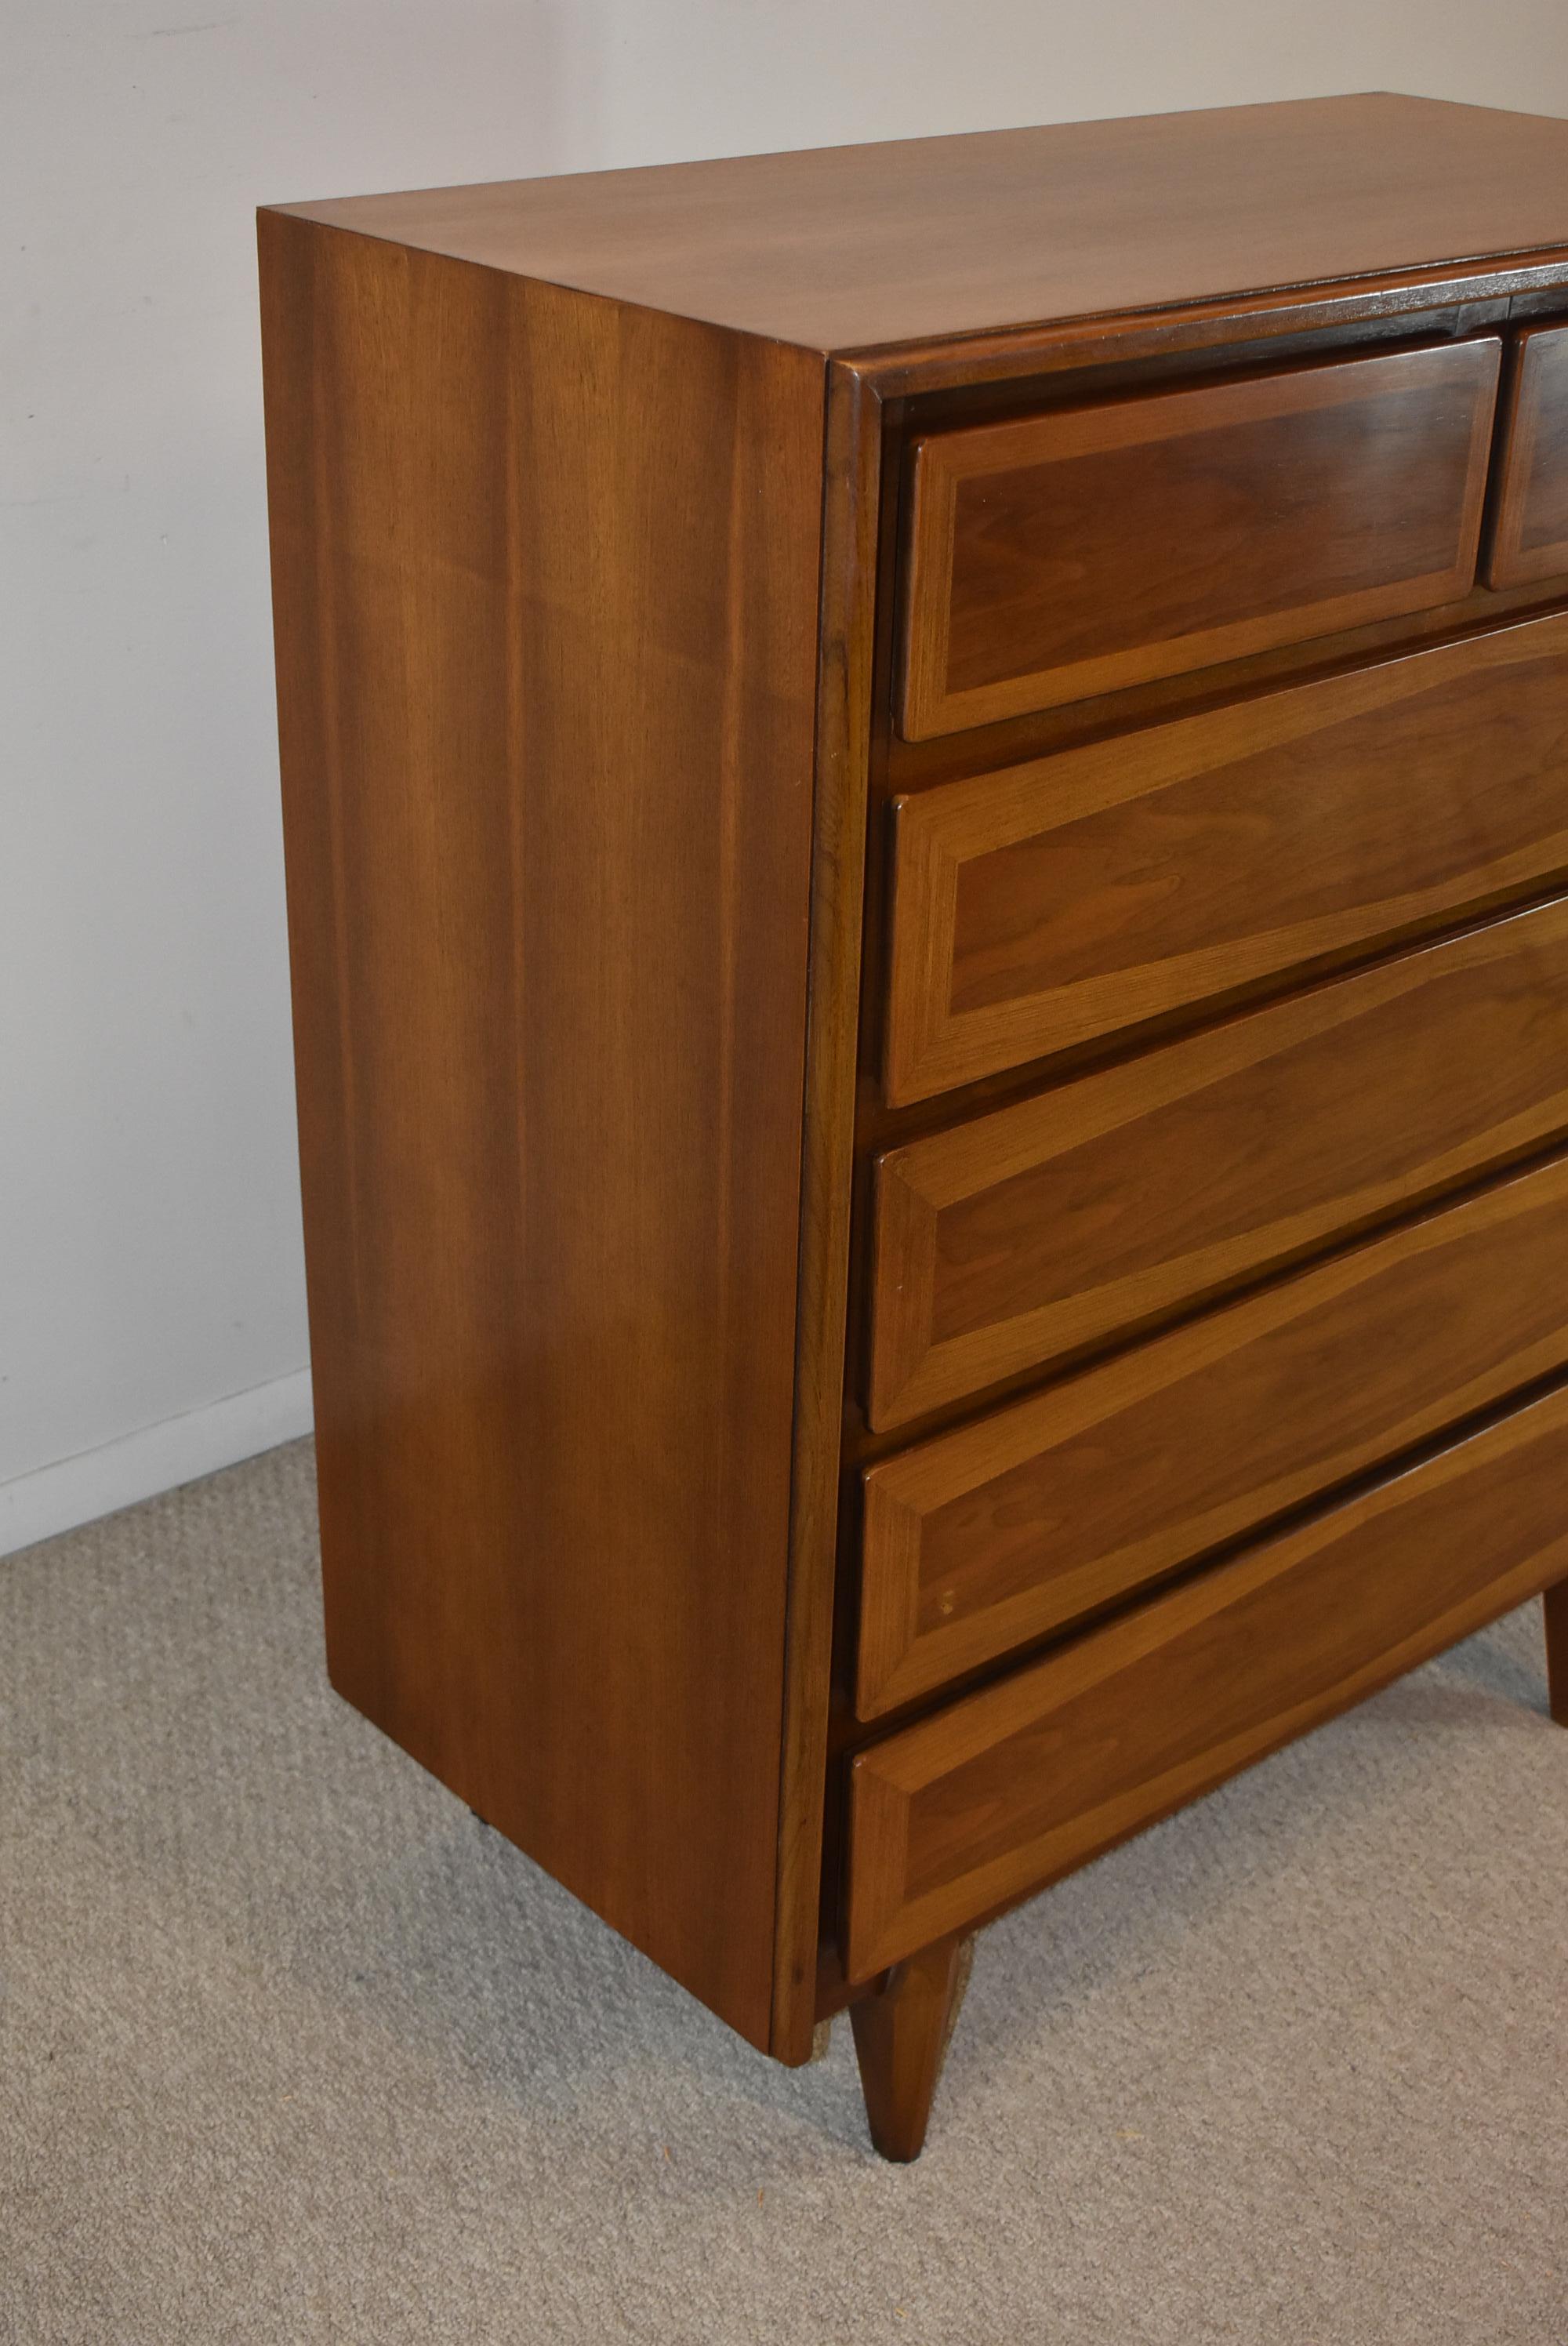 Walnut mid-century modern 6-drawer chest of drawers with diamond pattern inlaid drawer fronts and sculpted legs. Great condition. Part of a 4-piece set. 44